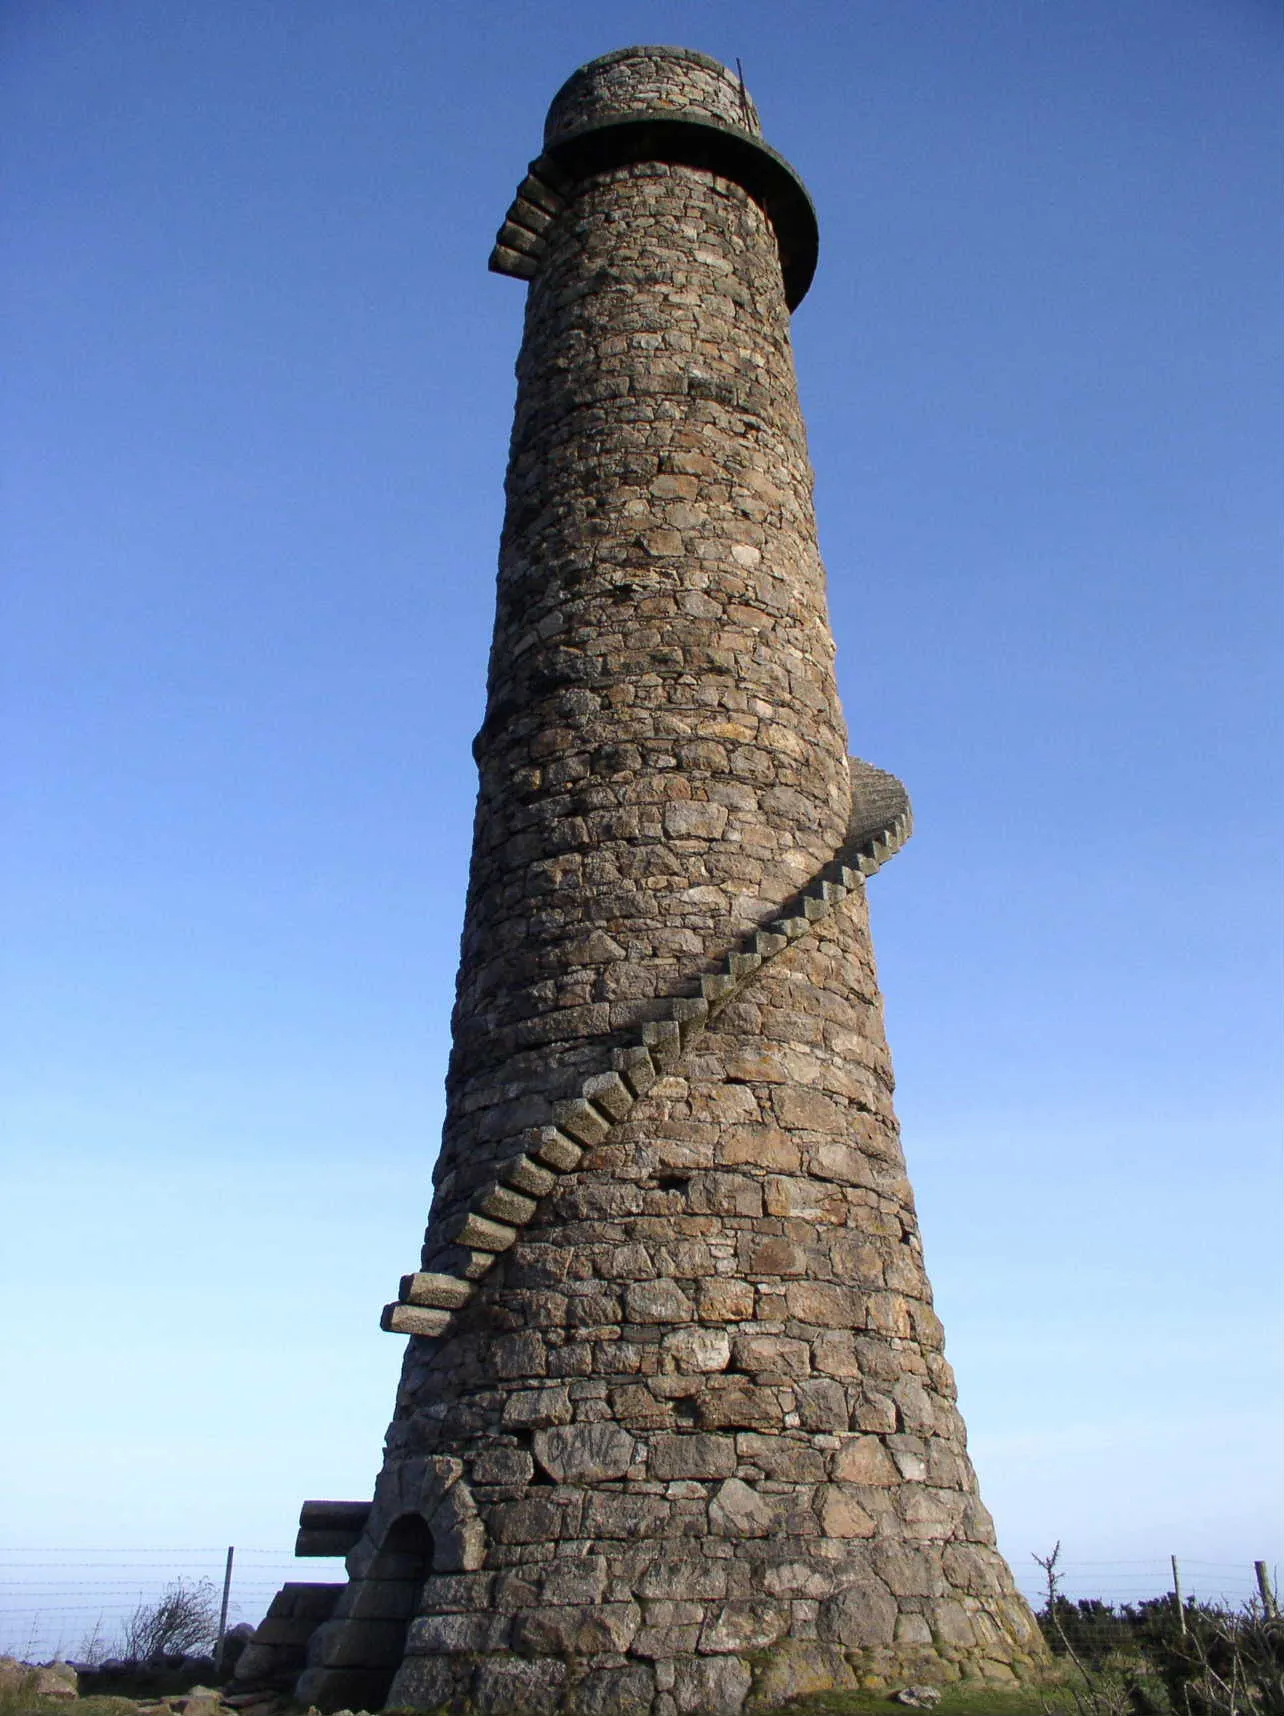 Photo showing: Lead Mines Chimney near Kiltiernan. Chimney at disused lead mines near Kiltiernan, South Co. Dublin. A well-known local land mark.